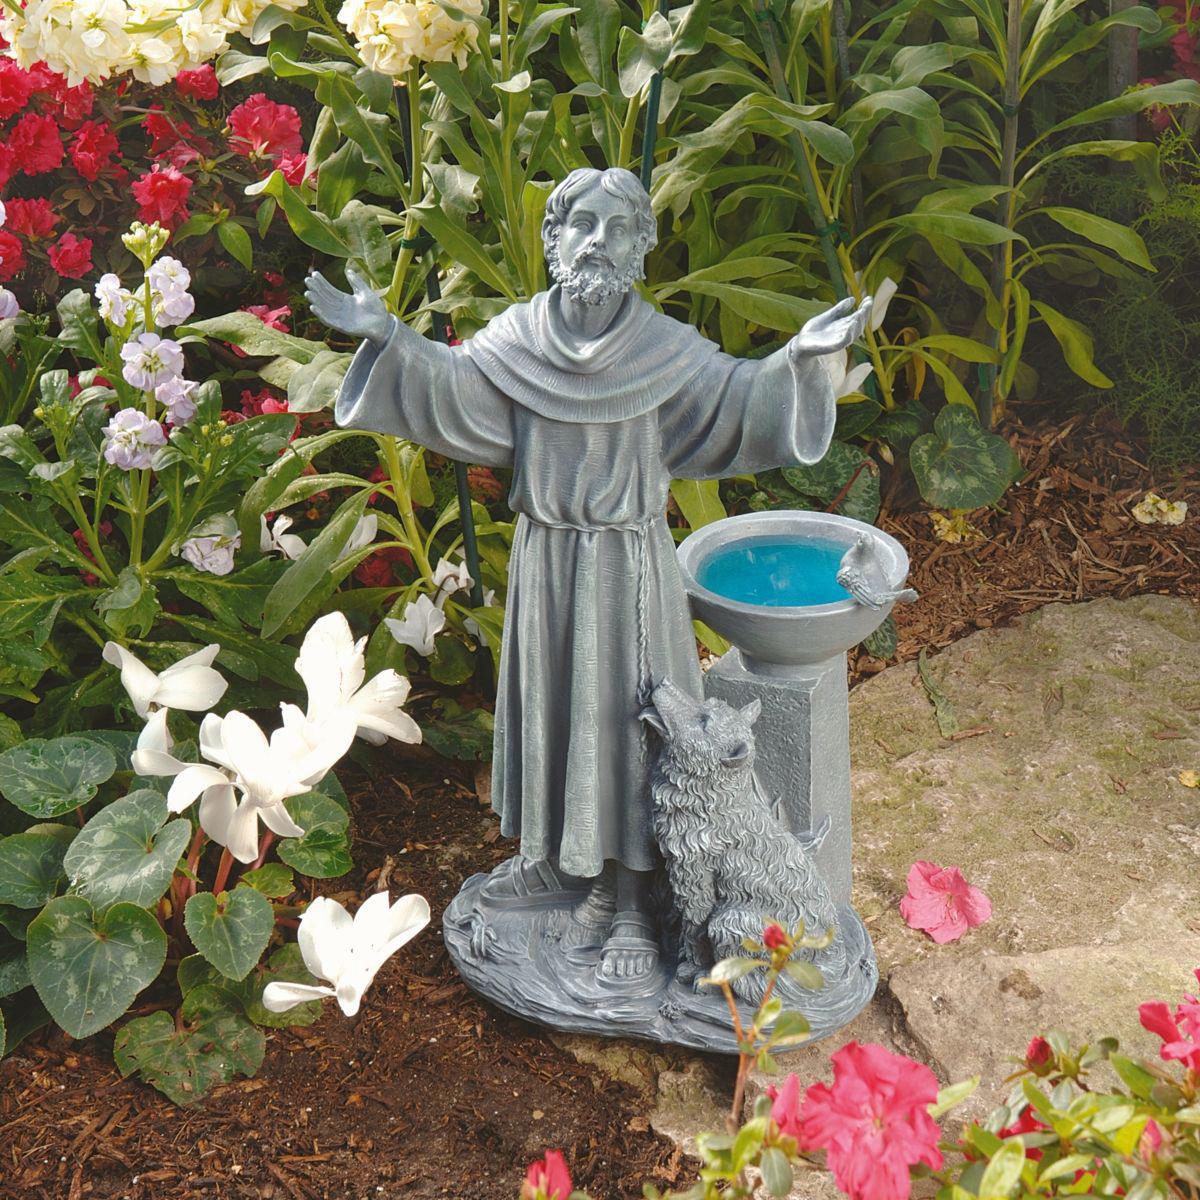 St. Francis's Blessing Garden Statue